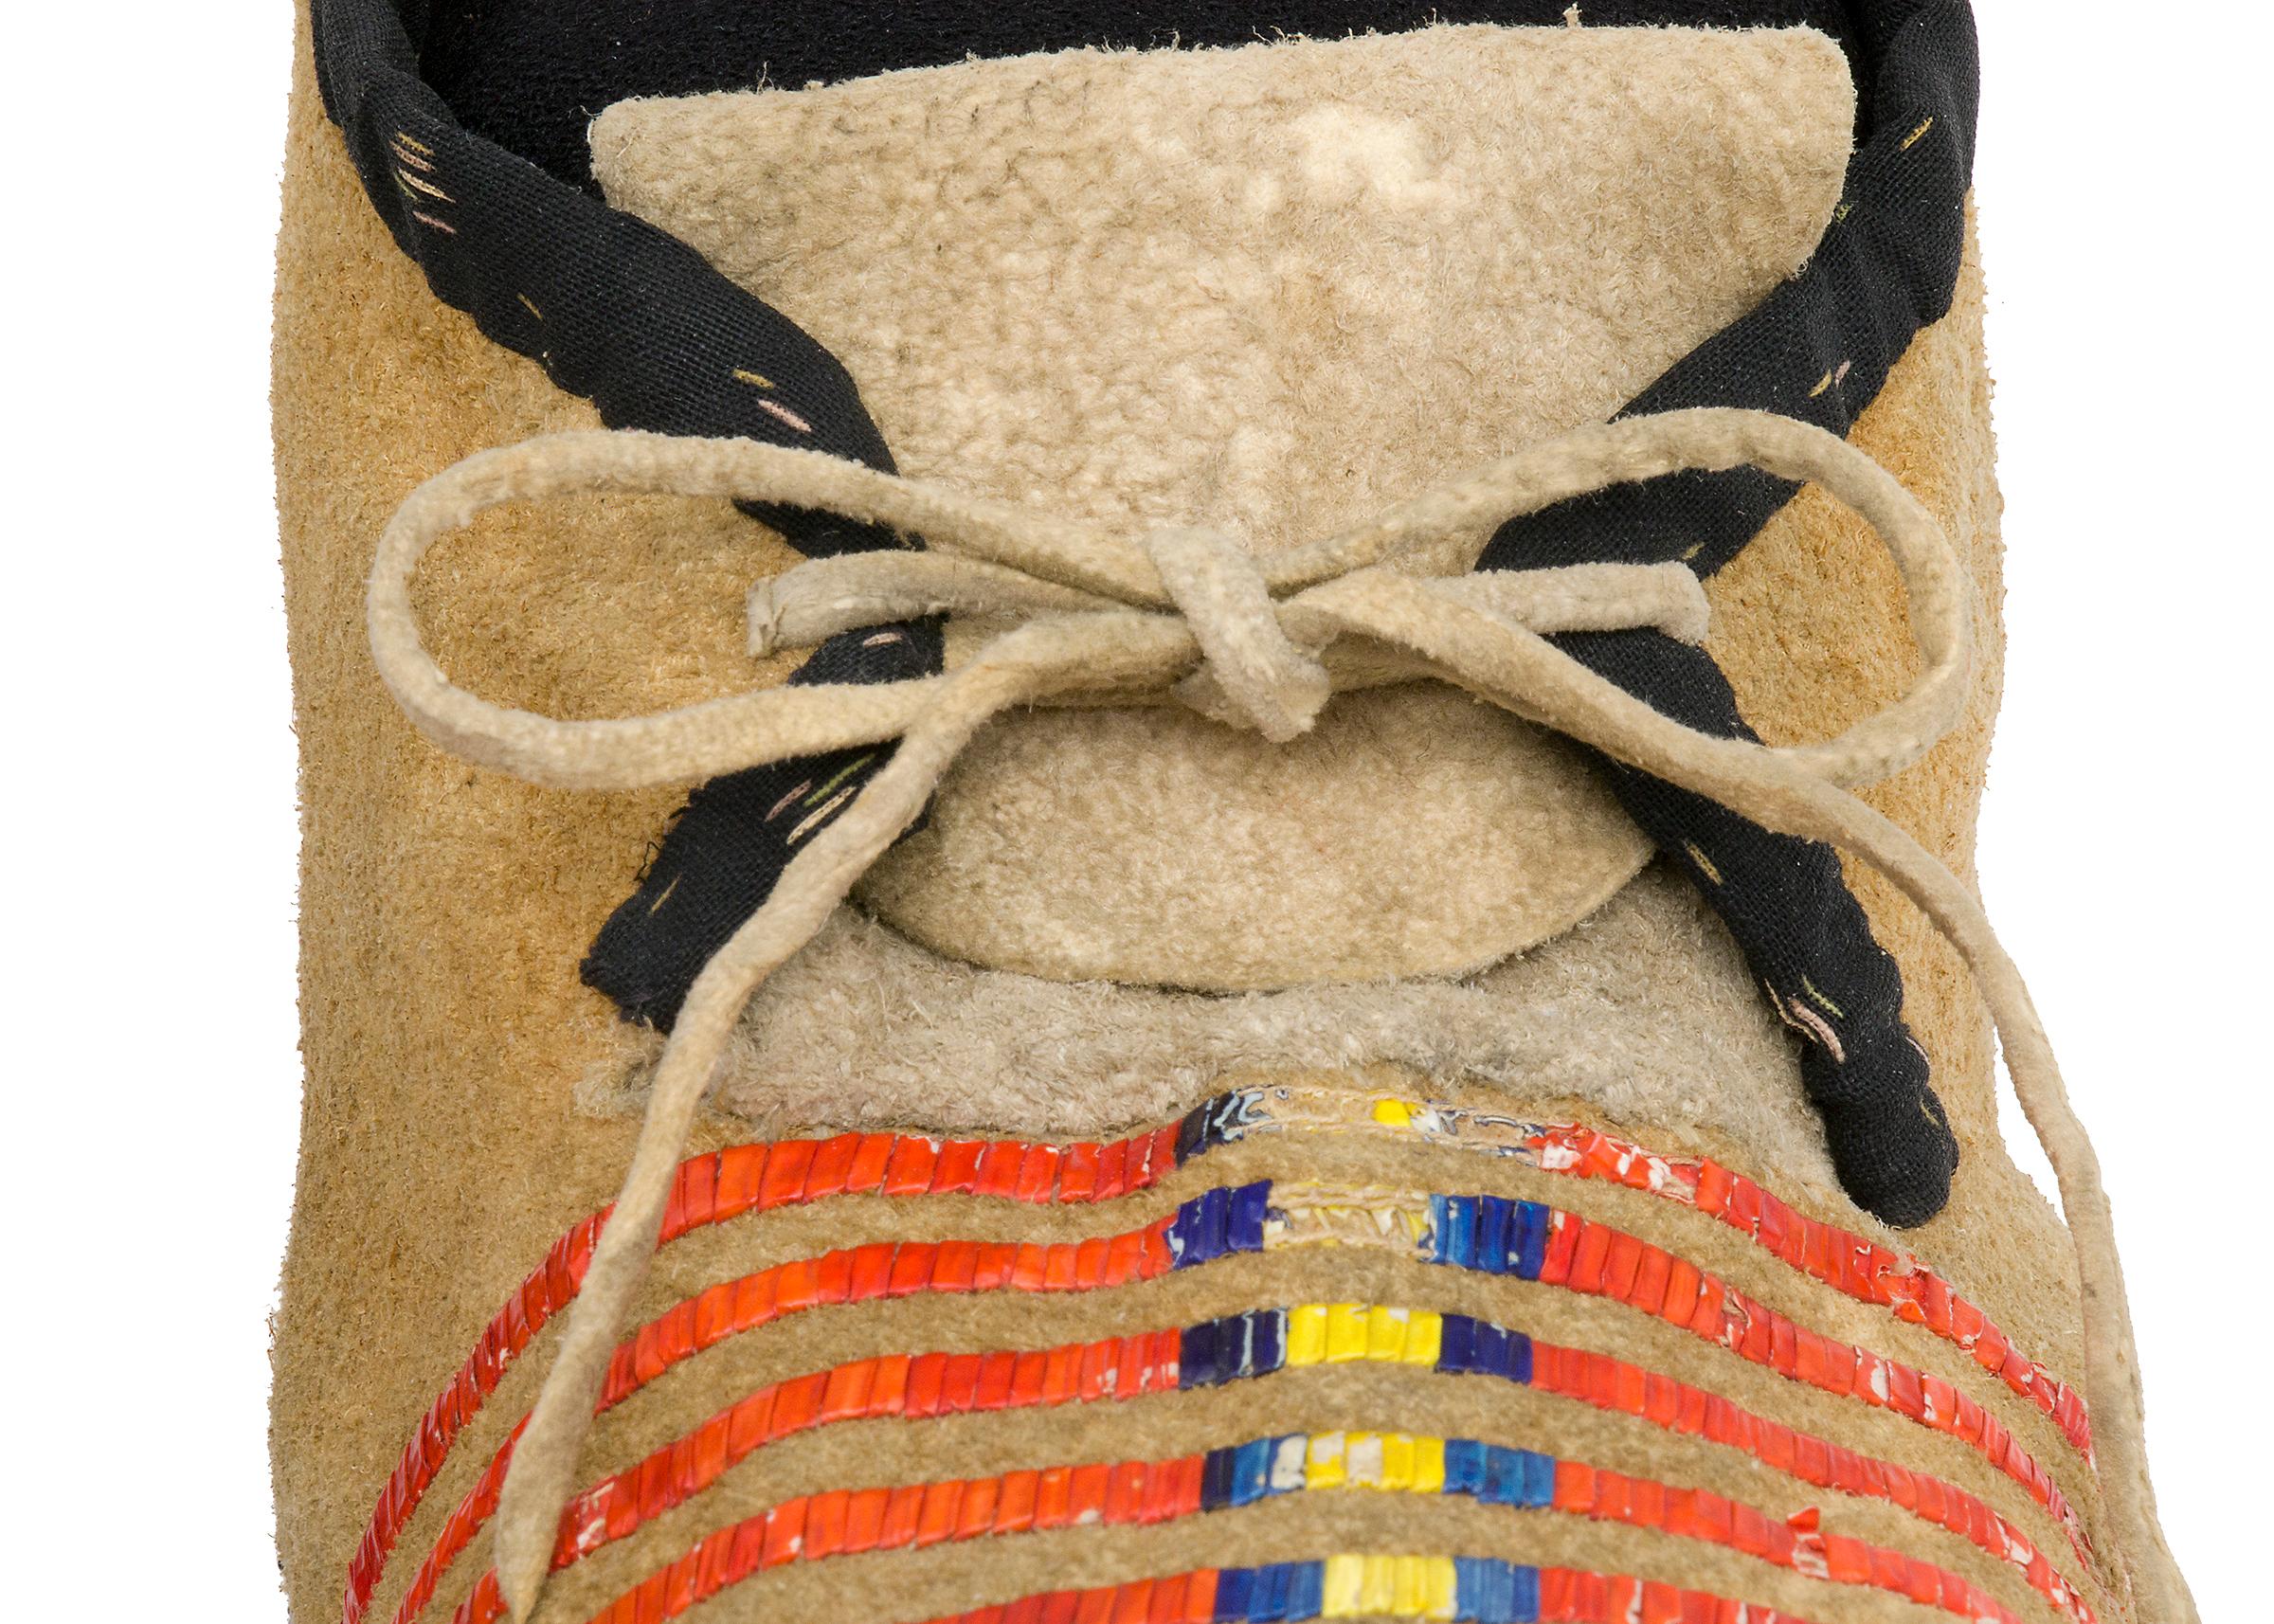 American Antique Sioux Moccasins 'Plains Indian' 1870s Buckskin, Quillwork & Beadwork For Sale